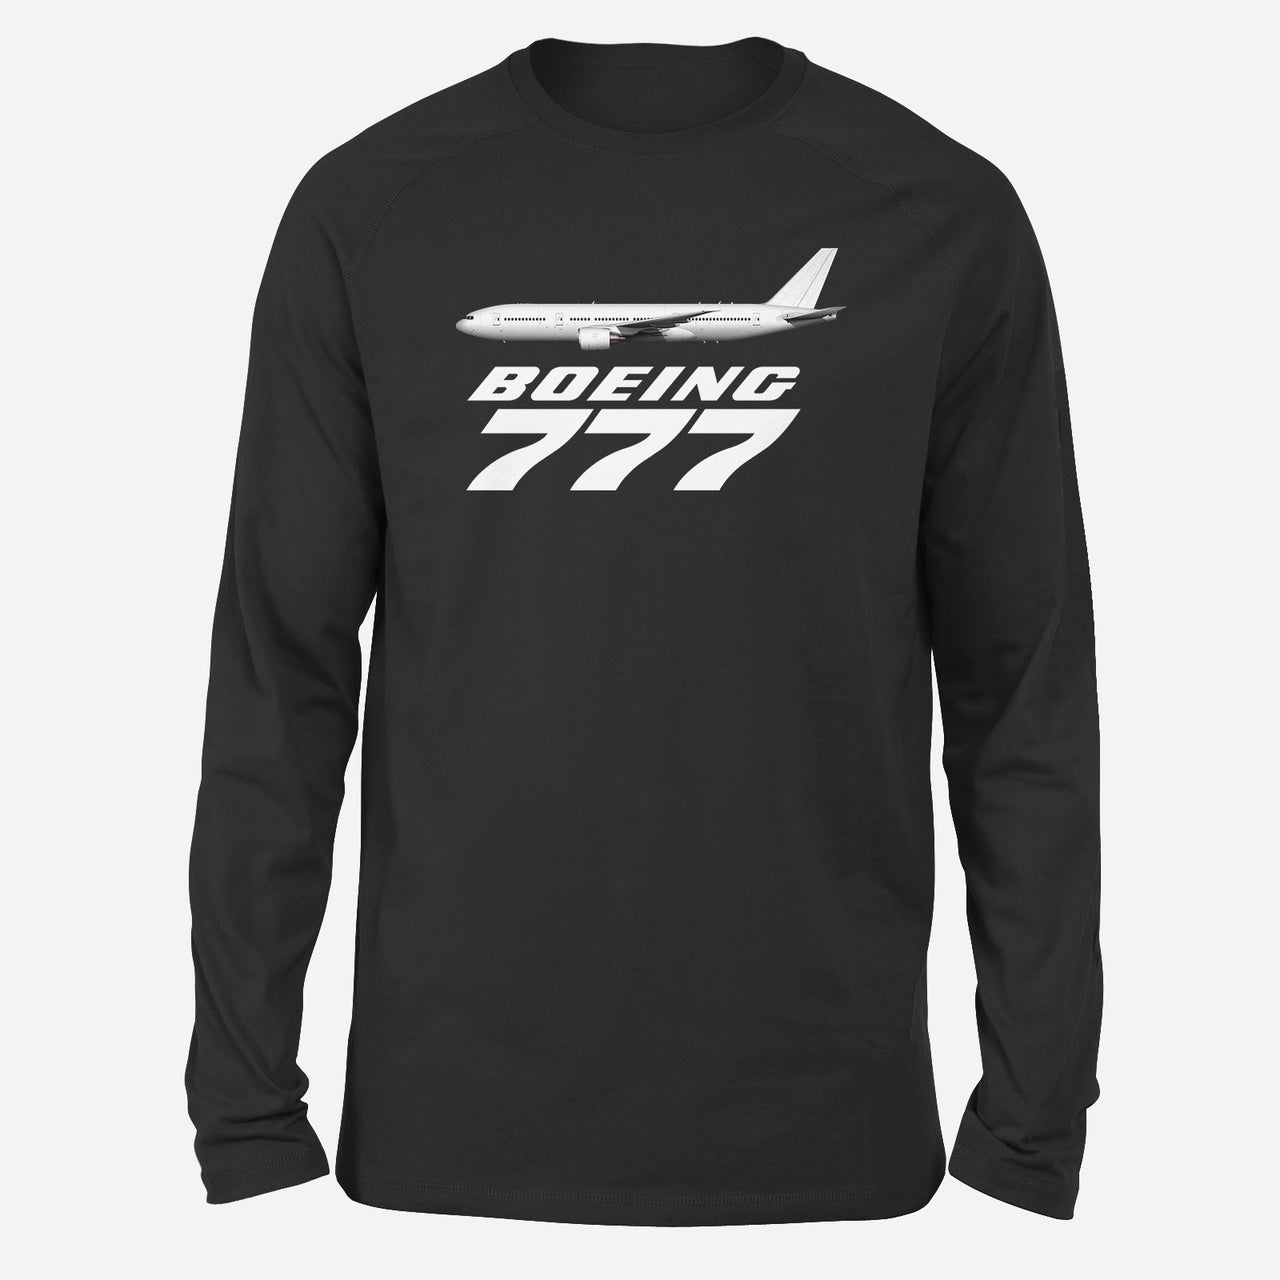 The Boeing 777 Designed Long-Sleeve T-Shirts